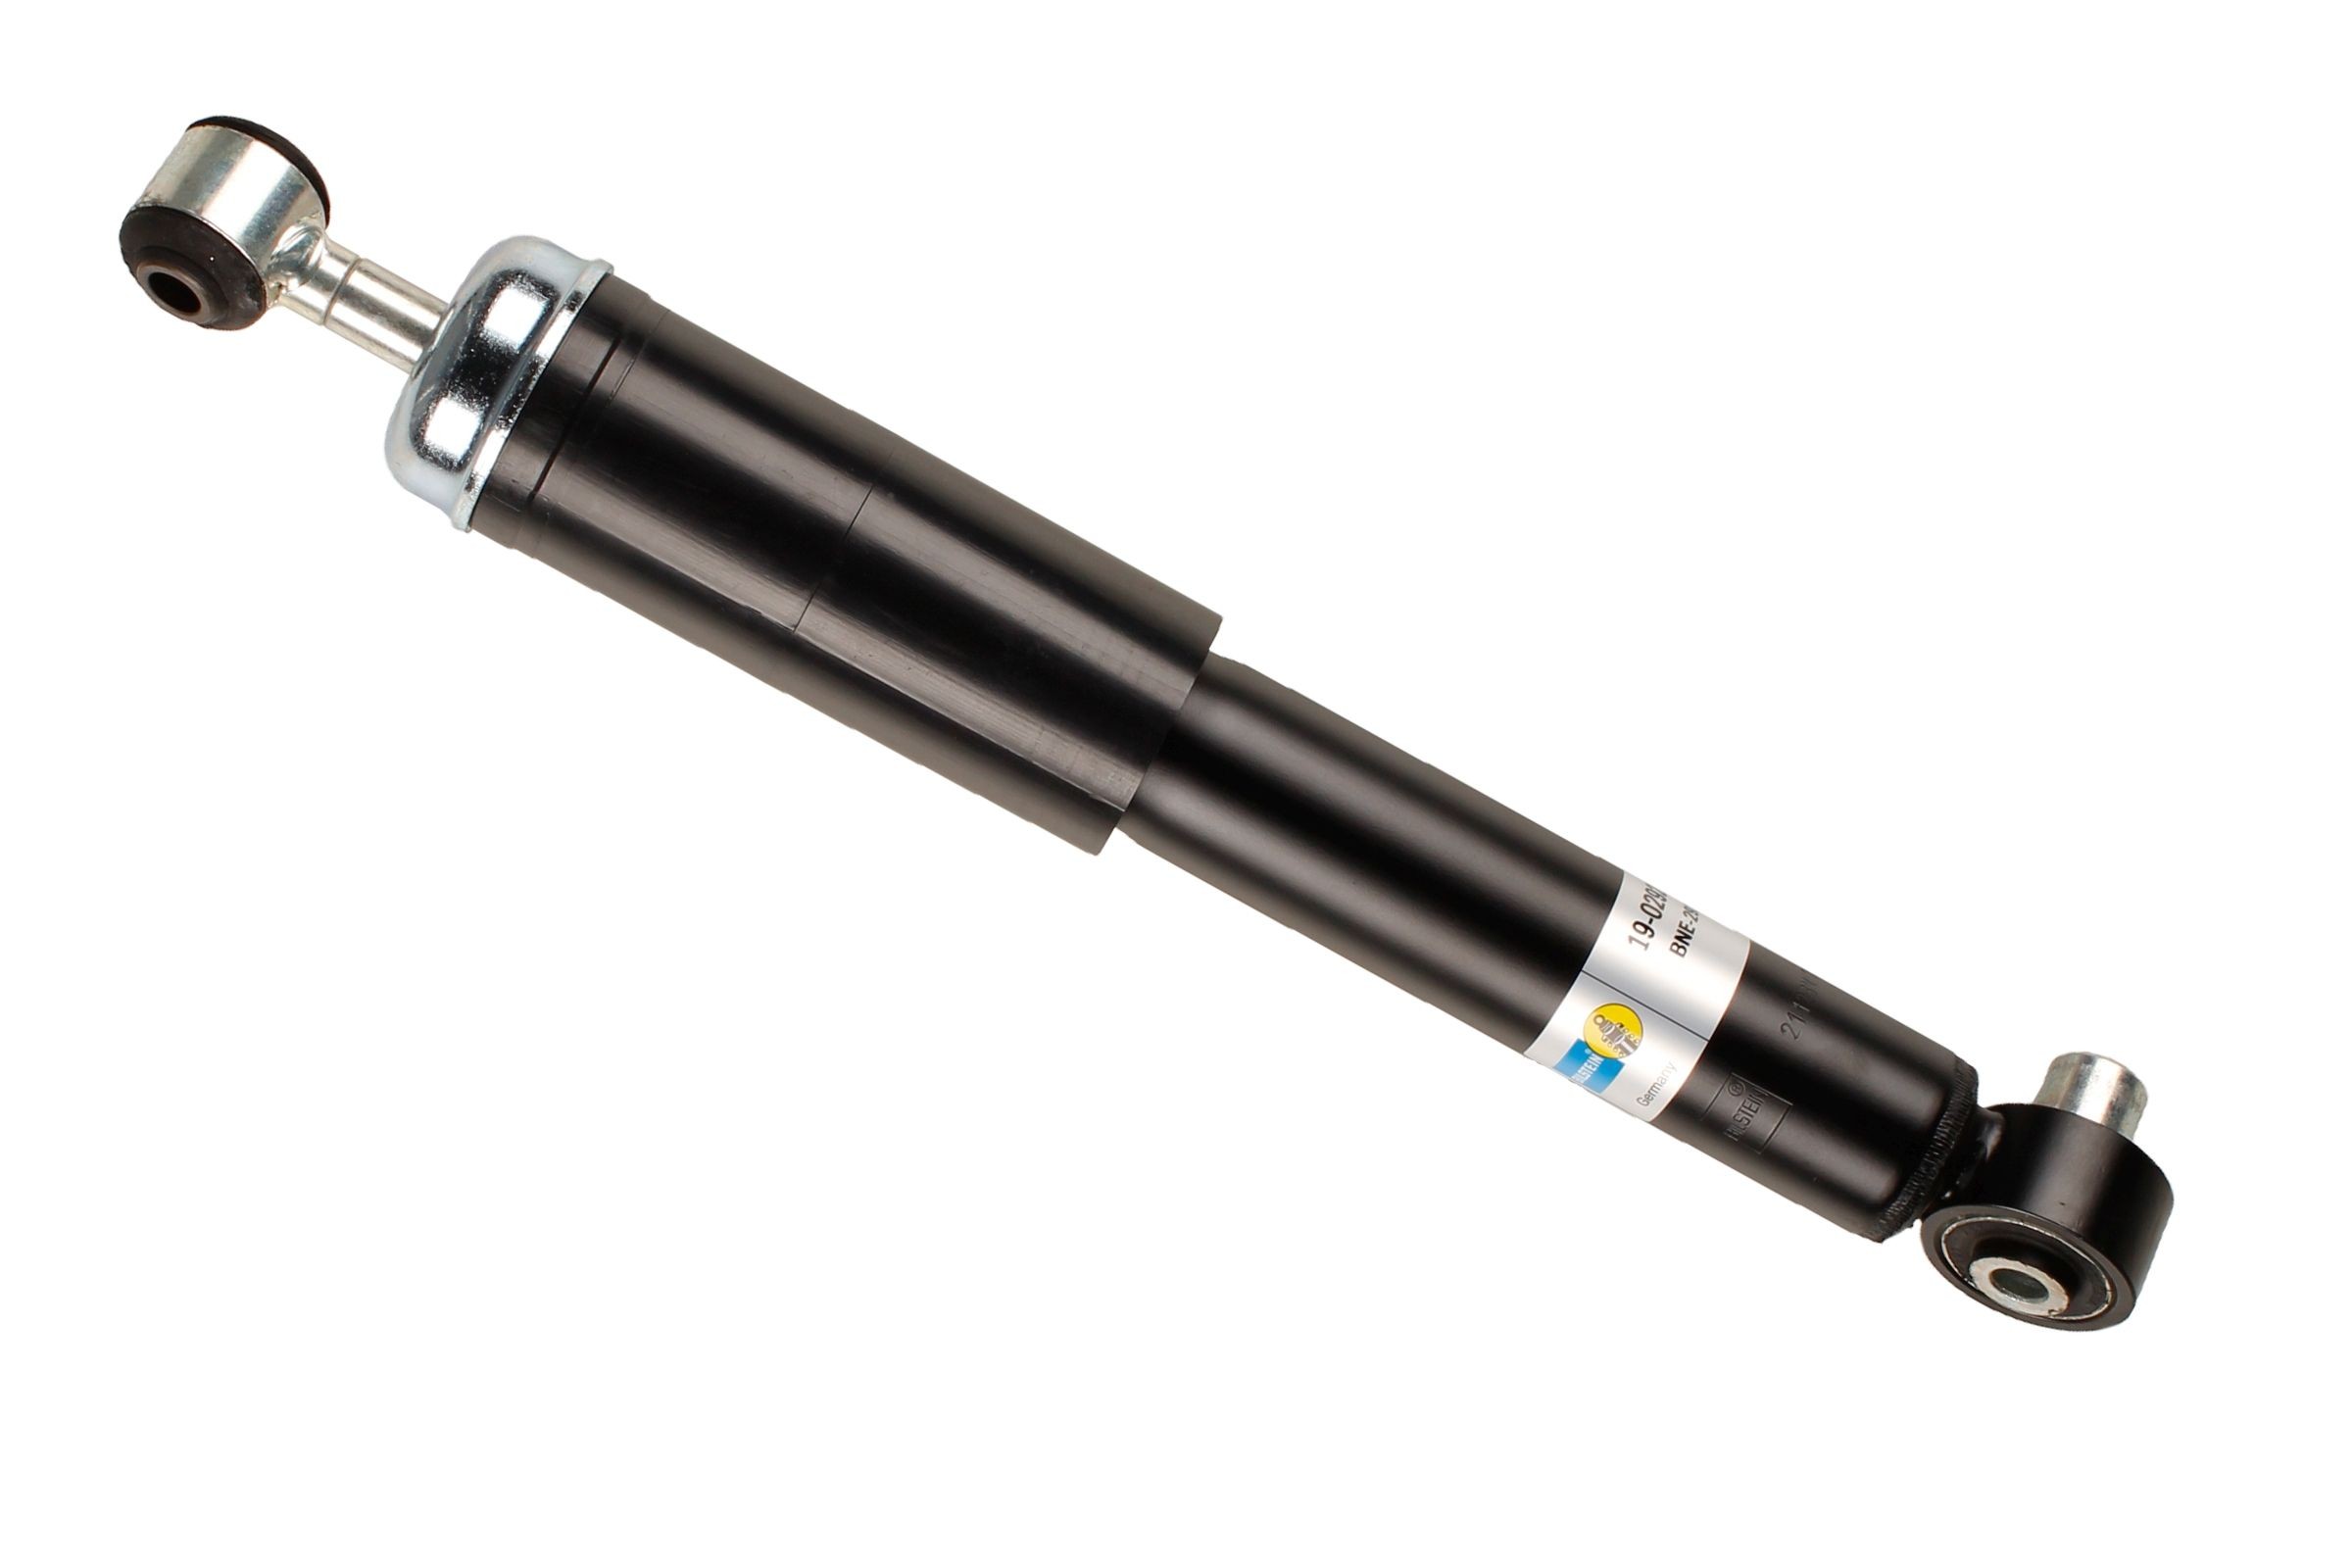 BILSTEIN - B4 OE Replacement 19-029283 Shock absorber Rear Axle, Gas Pressure, Twin-Tube, Absorber does not carry a spring, Top eye, Bottom eye